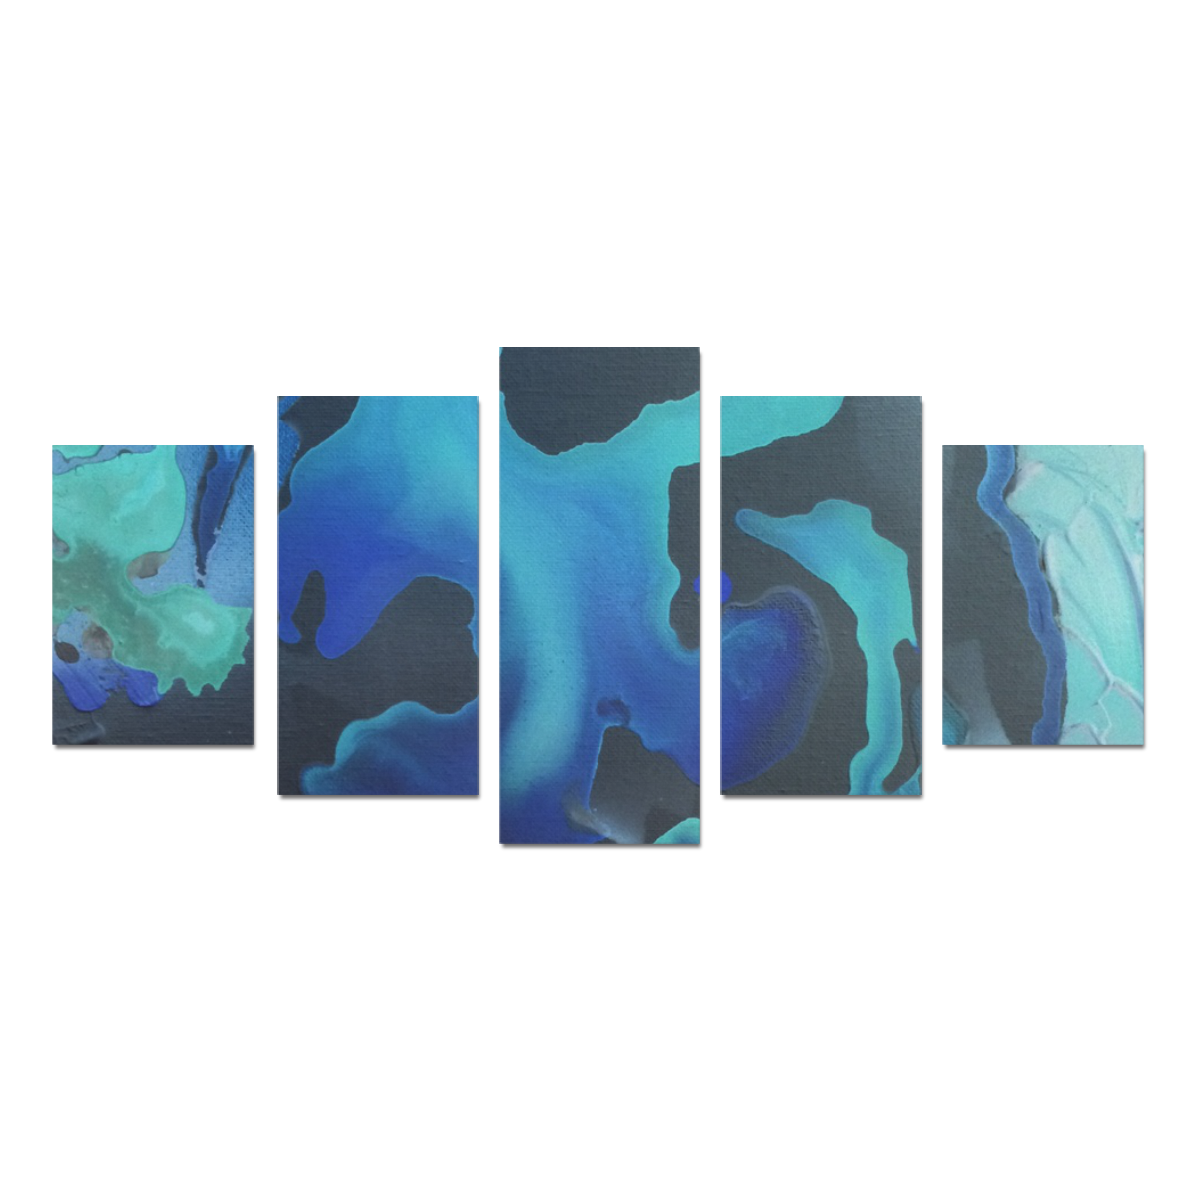 There are Mermaids Here Canvas Print Sets D (No Frame)